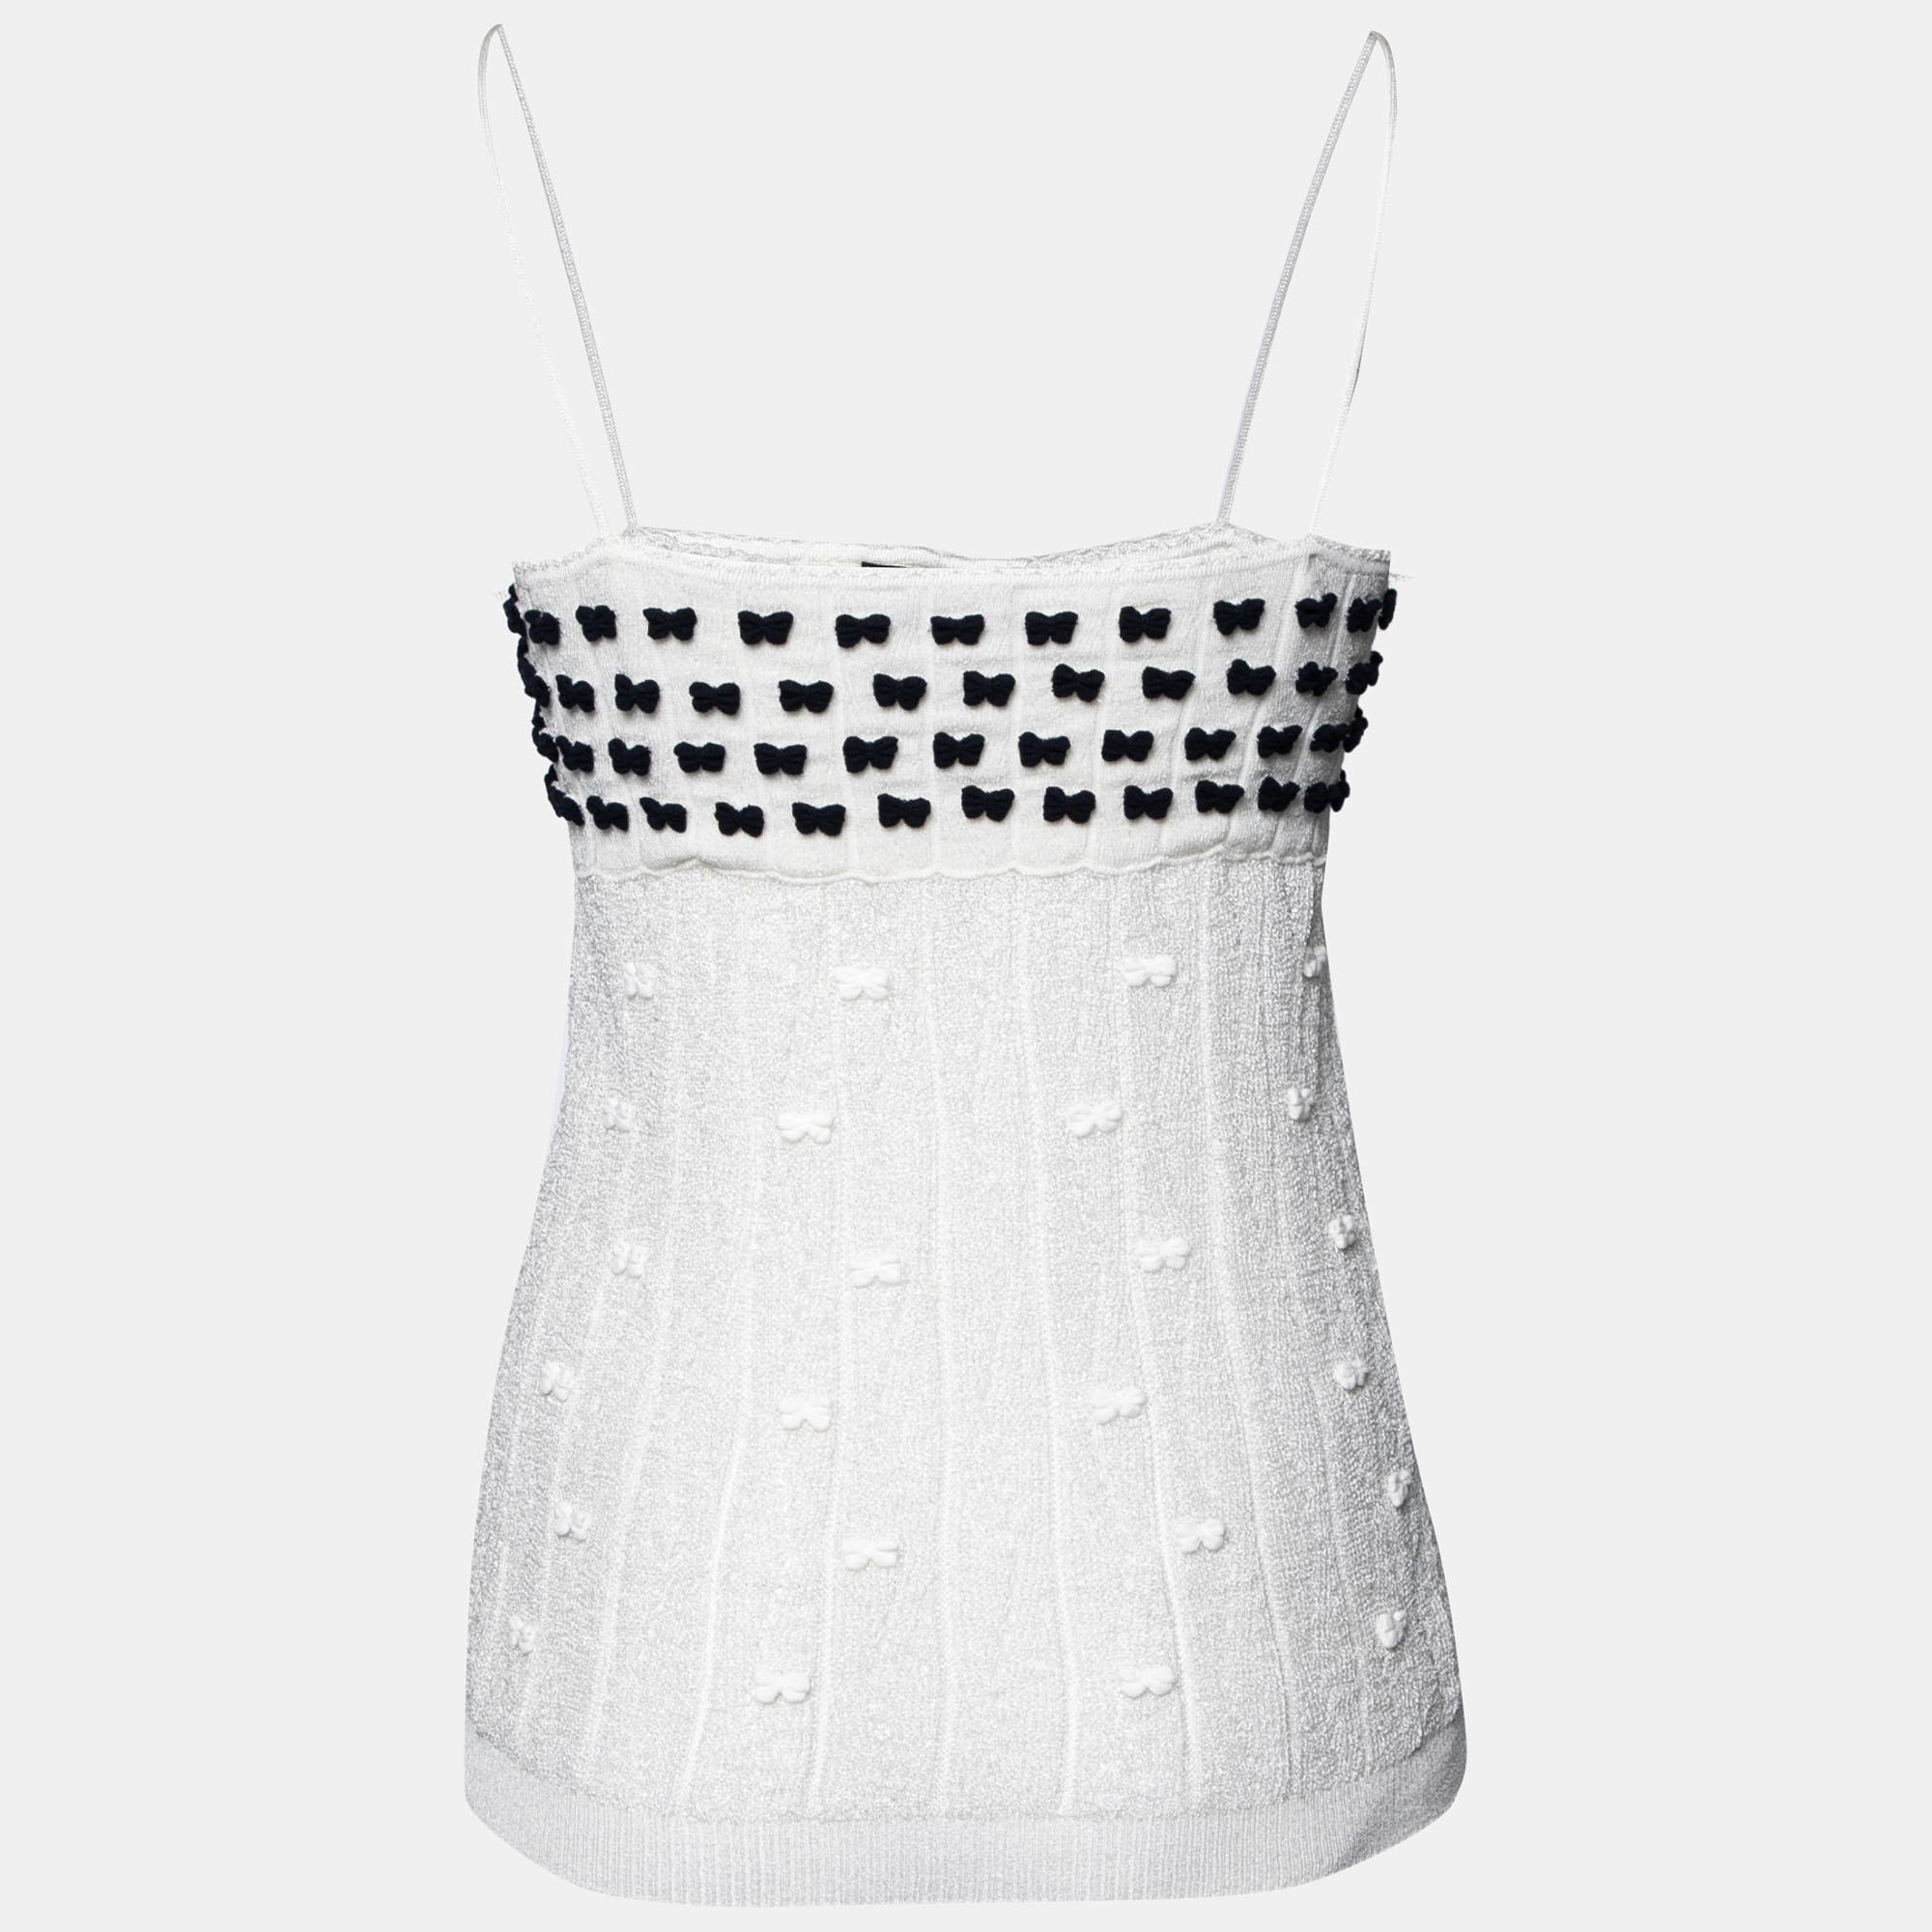 Comfortable and appealing, this lovely sleeveless top from Chanel is a must-have clothing item. Created from quality materials, it carries bow motifs that stand out against the white. The creation will pair well with jeans, skirts, and tailored